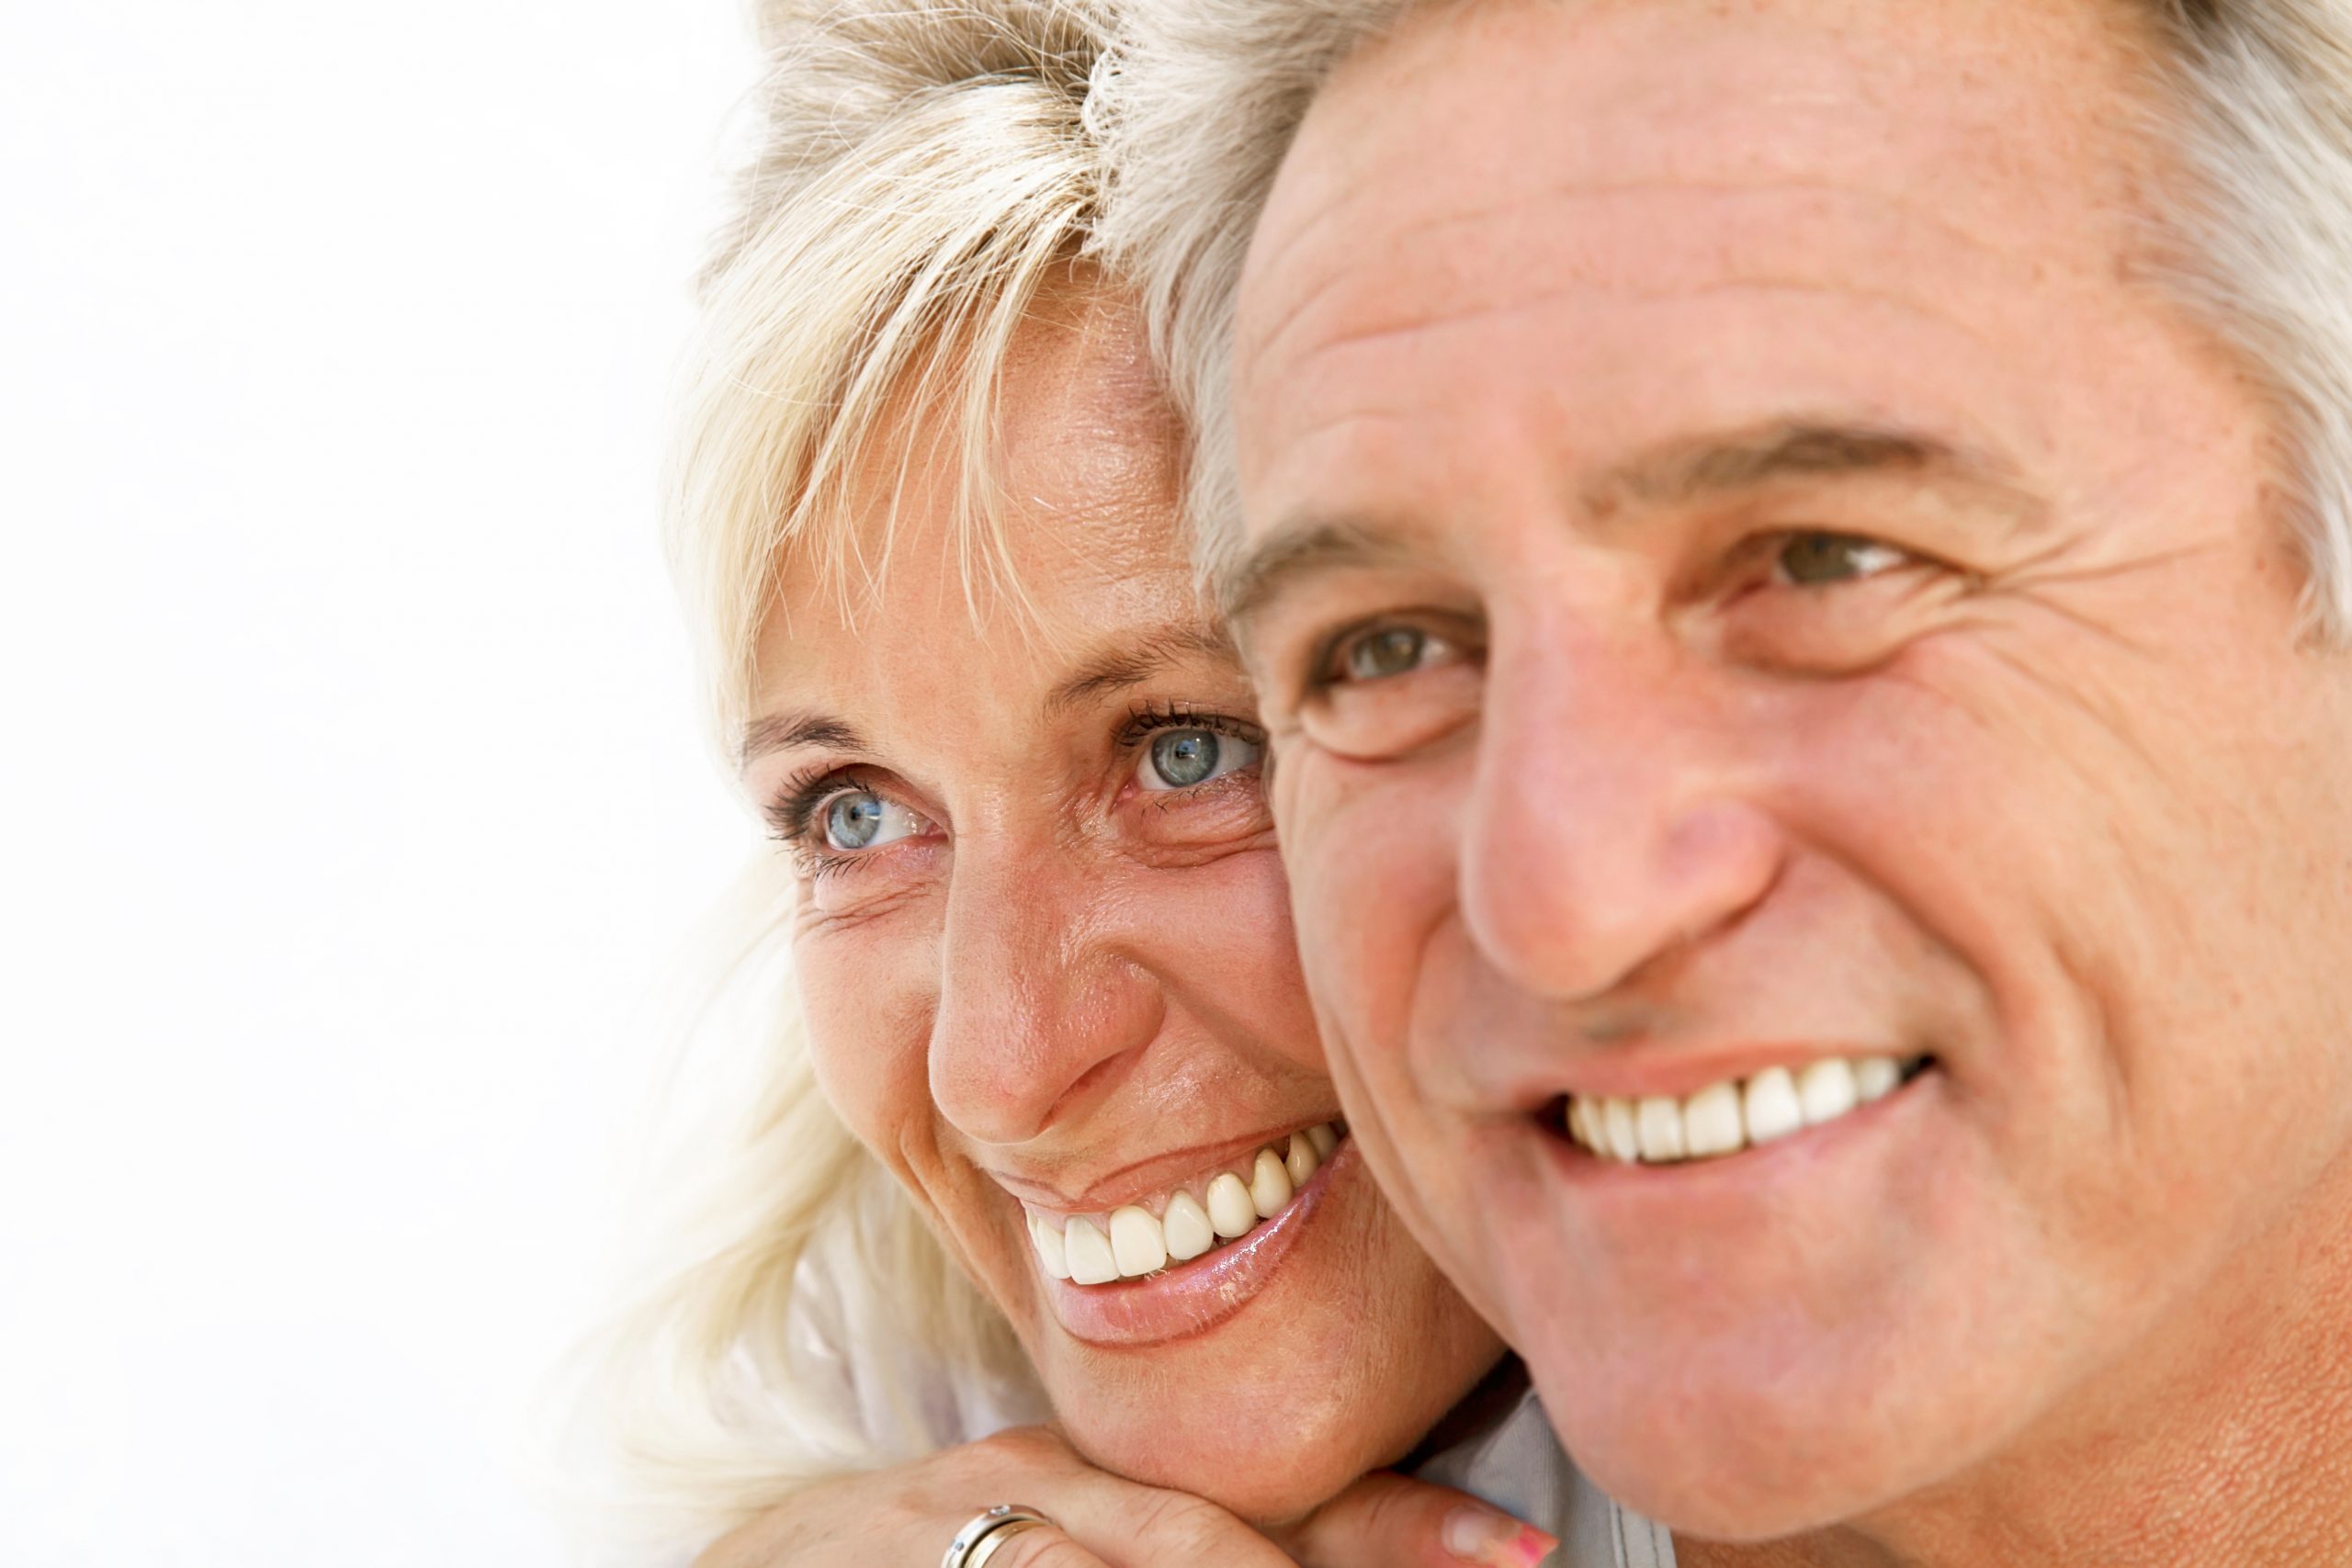 6 Things Every Patient Should Know About Dental Implants